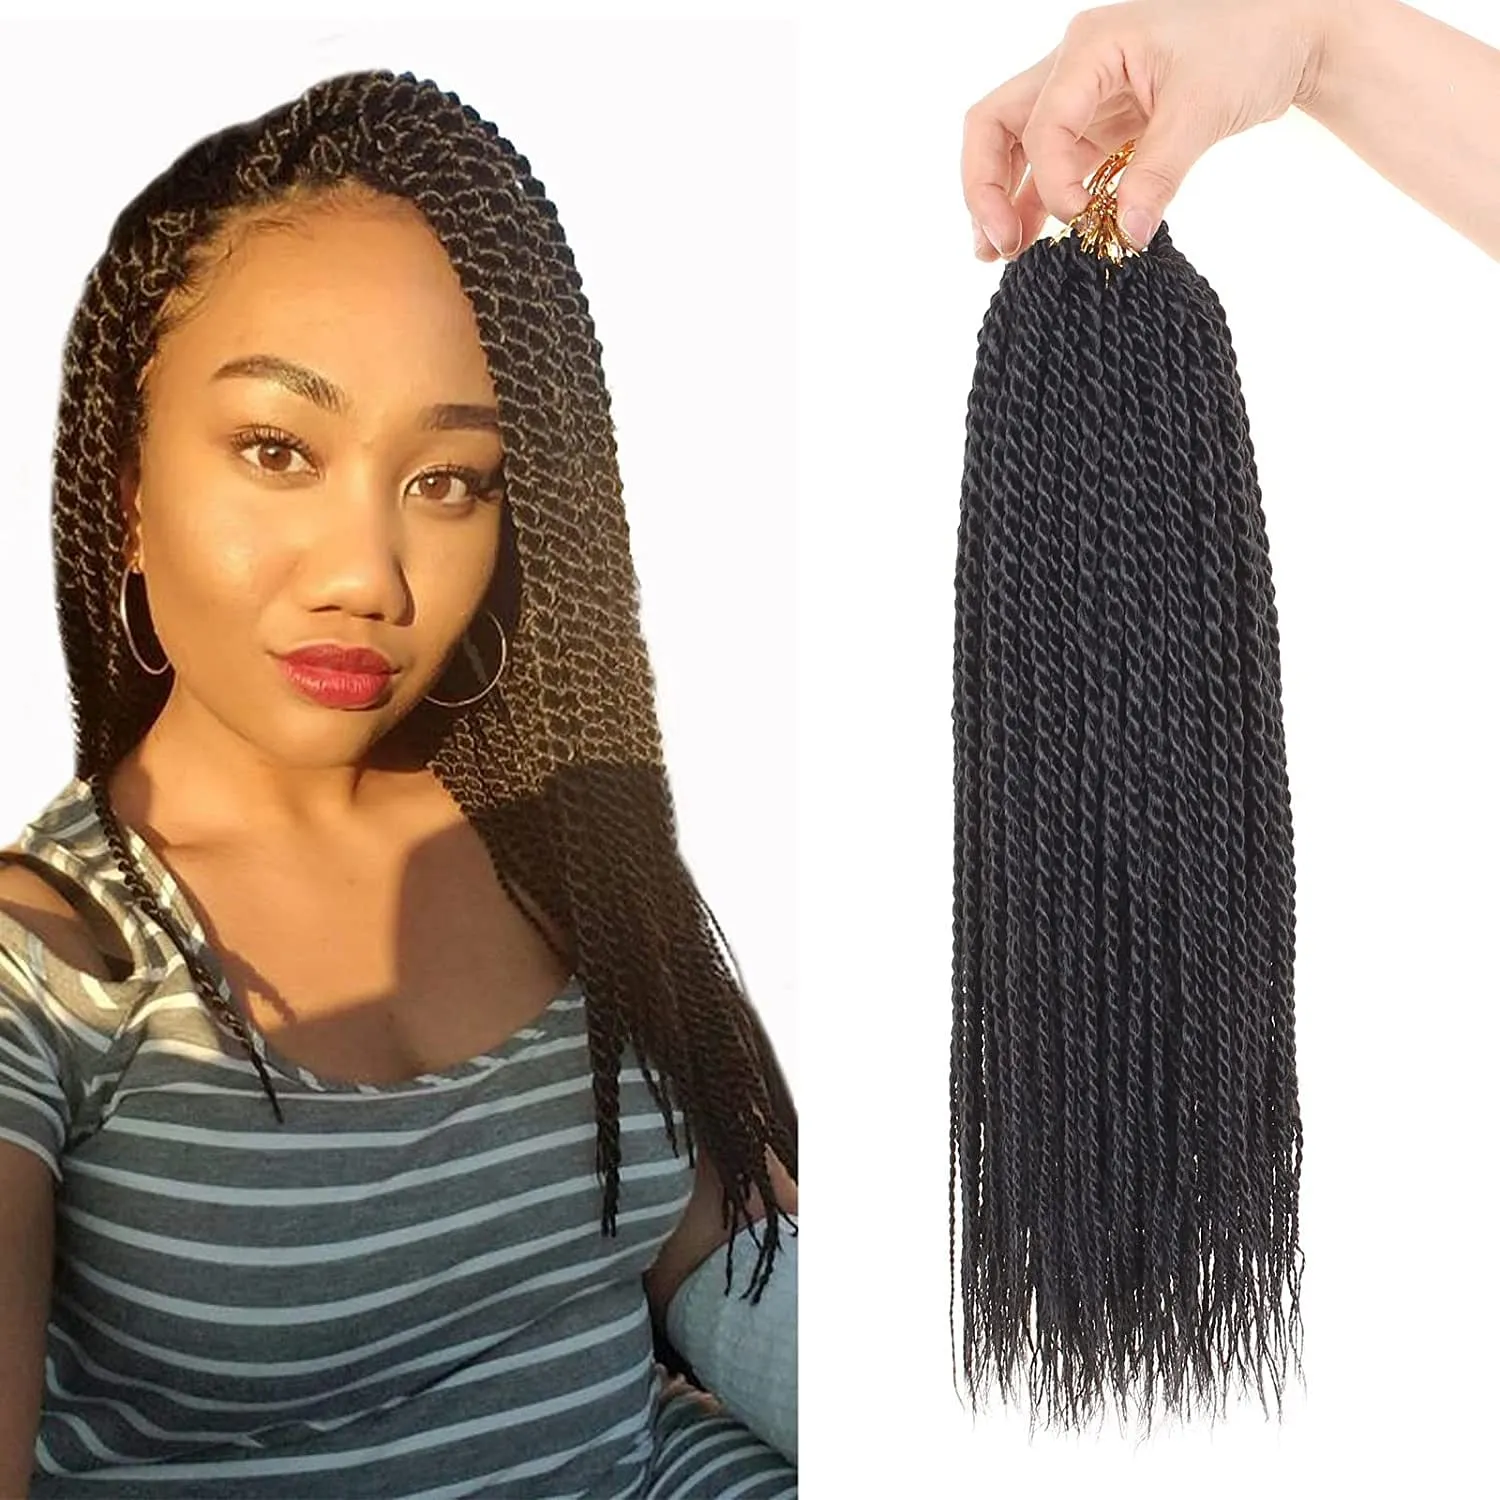 Small Senegalese Twist Crochet Hair Senegalese Twist Braids For Braiding  With Hot Water Setting From Eco_hair, $7.01